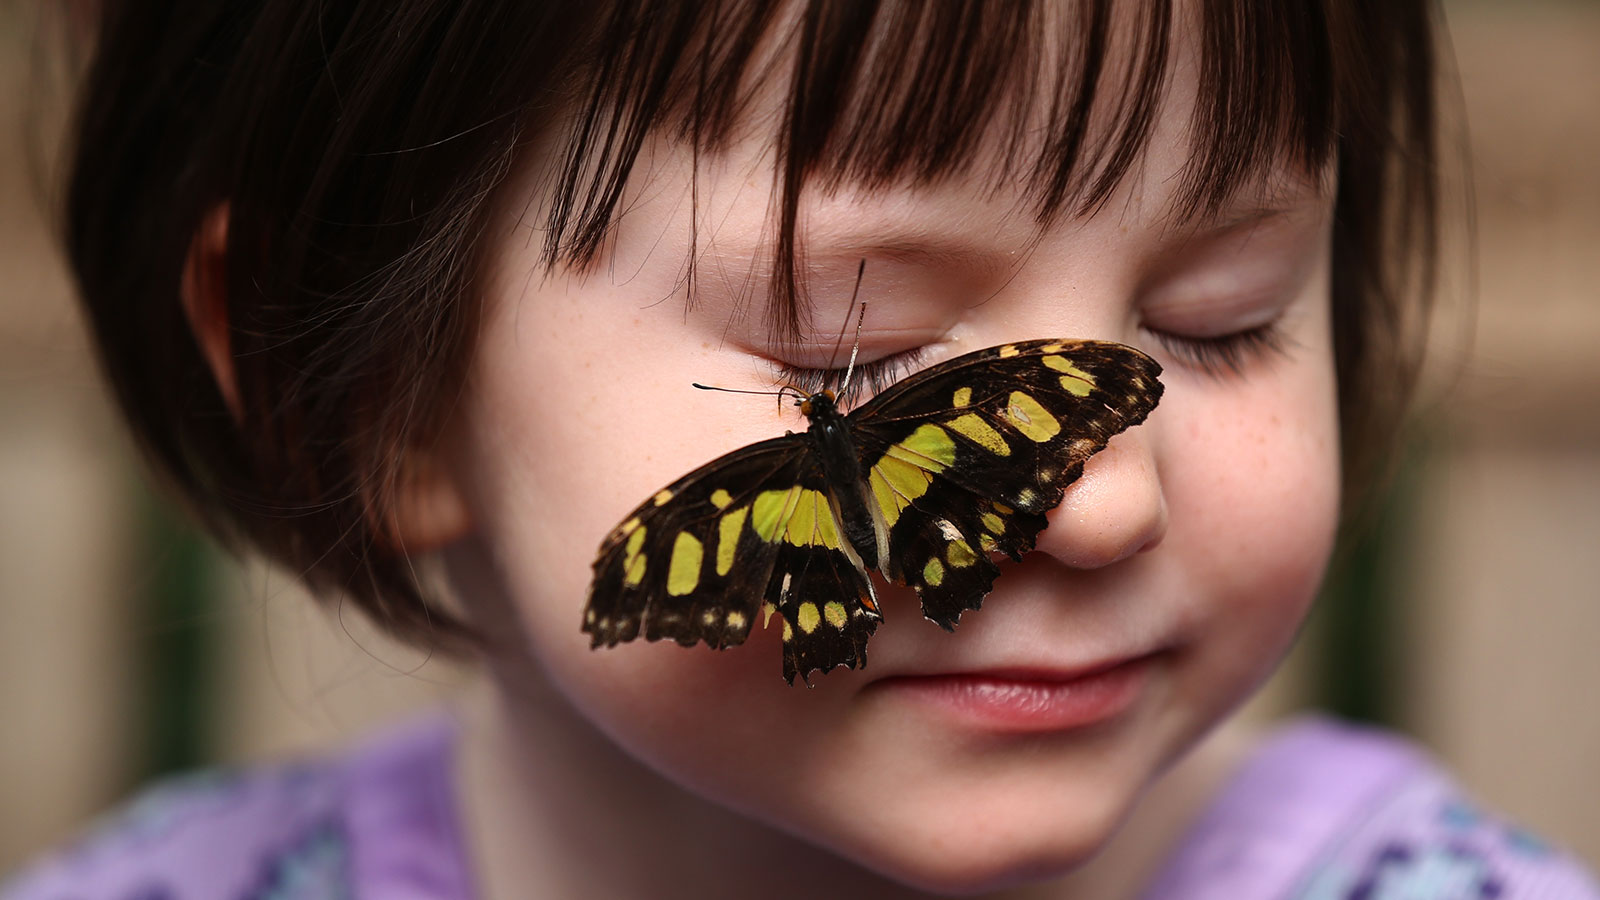 What Is the Butterfly Make and How Make We Misunderstand It?